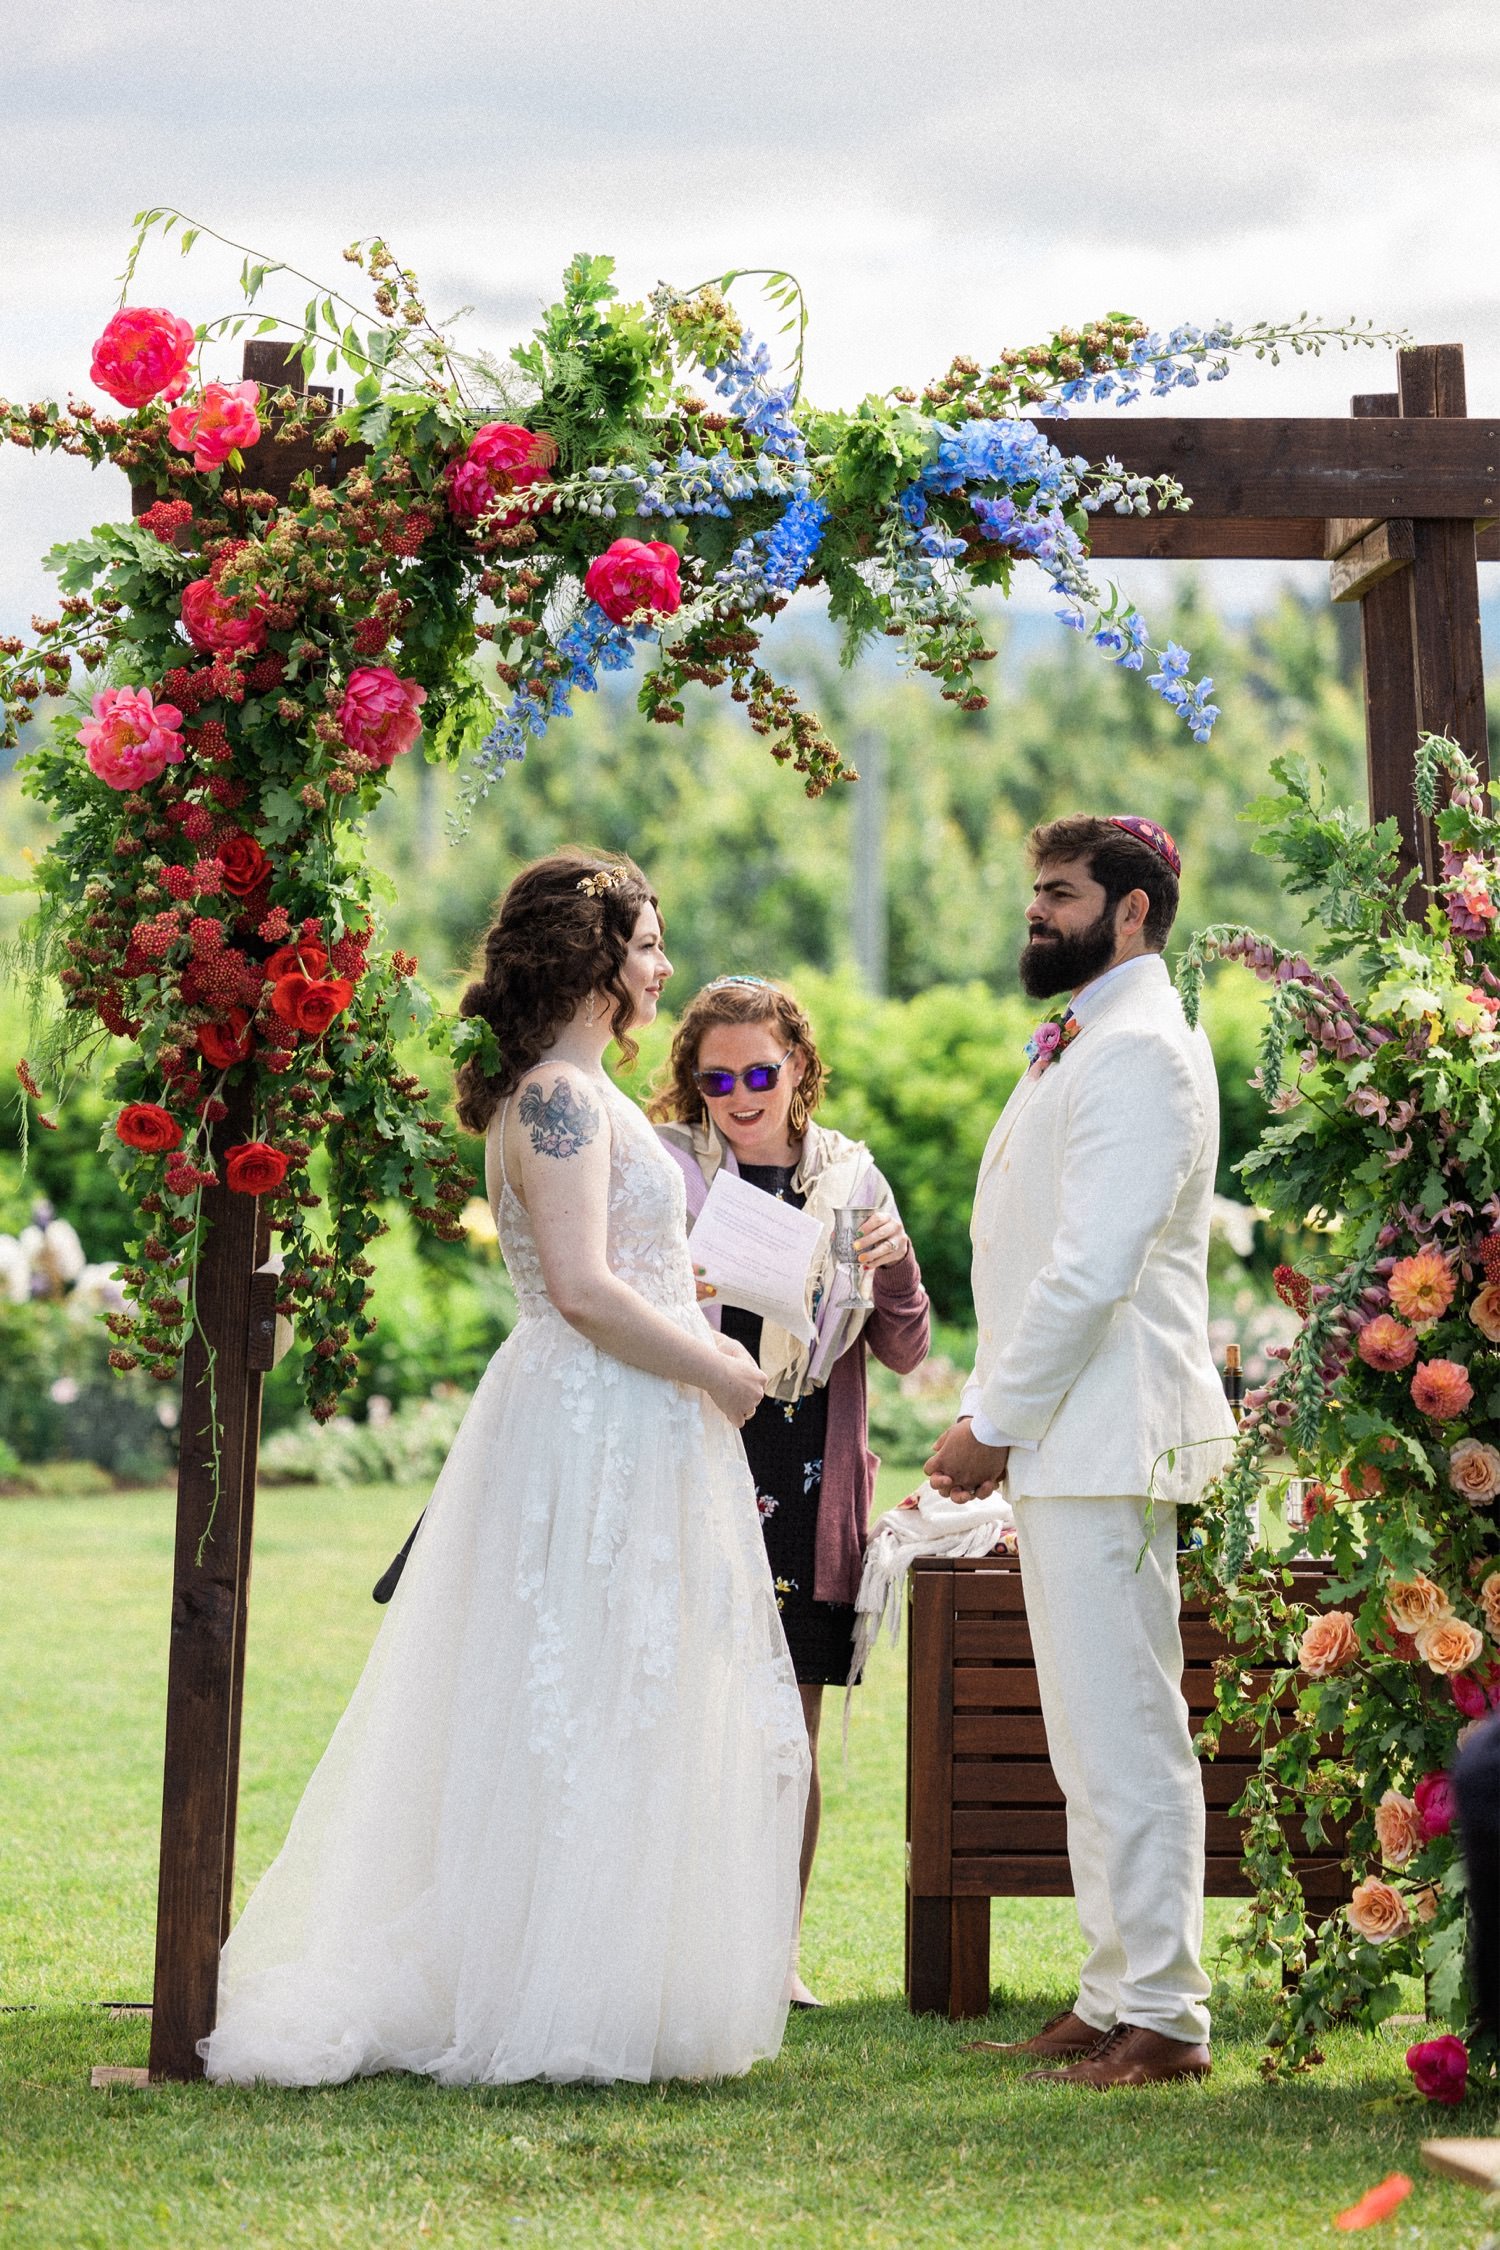 044_The Orchard Hood River Wedding2_bride and groom stand under floral arch during wedding ceremony.jpg